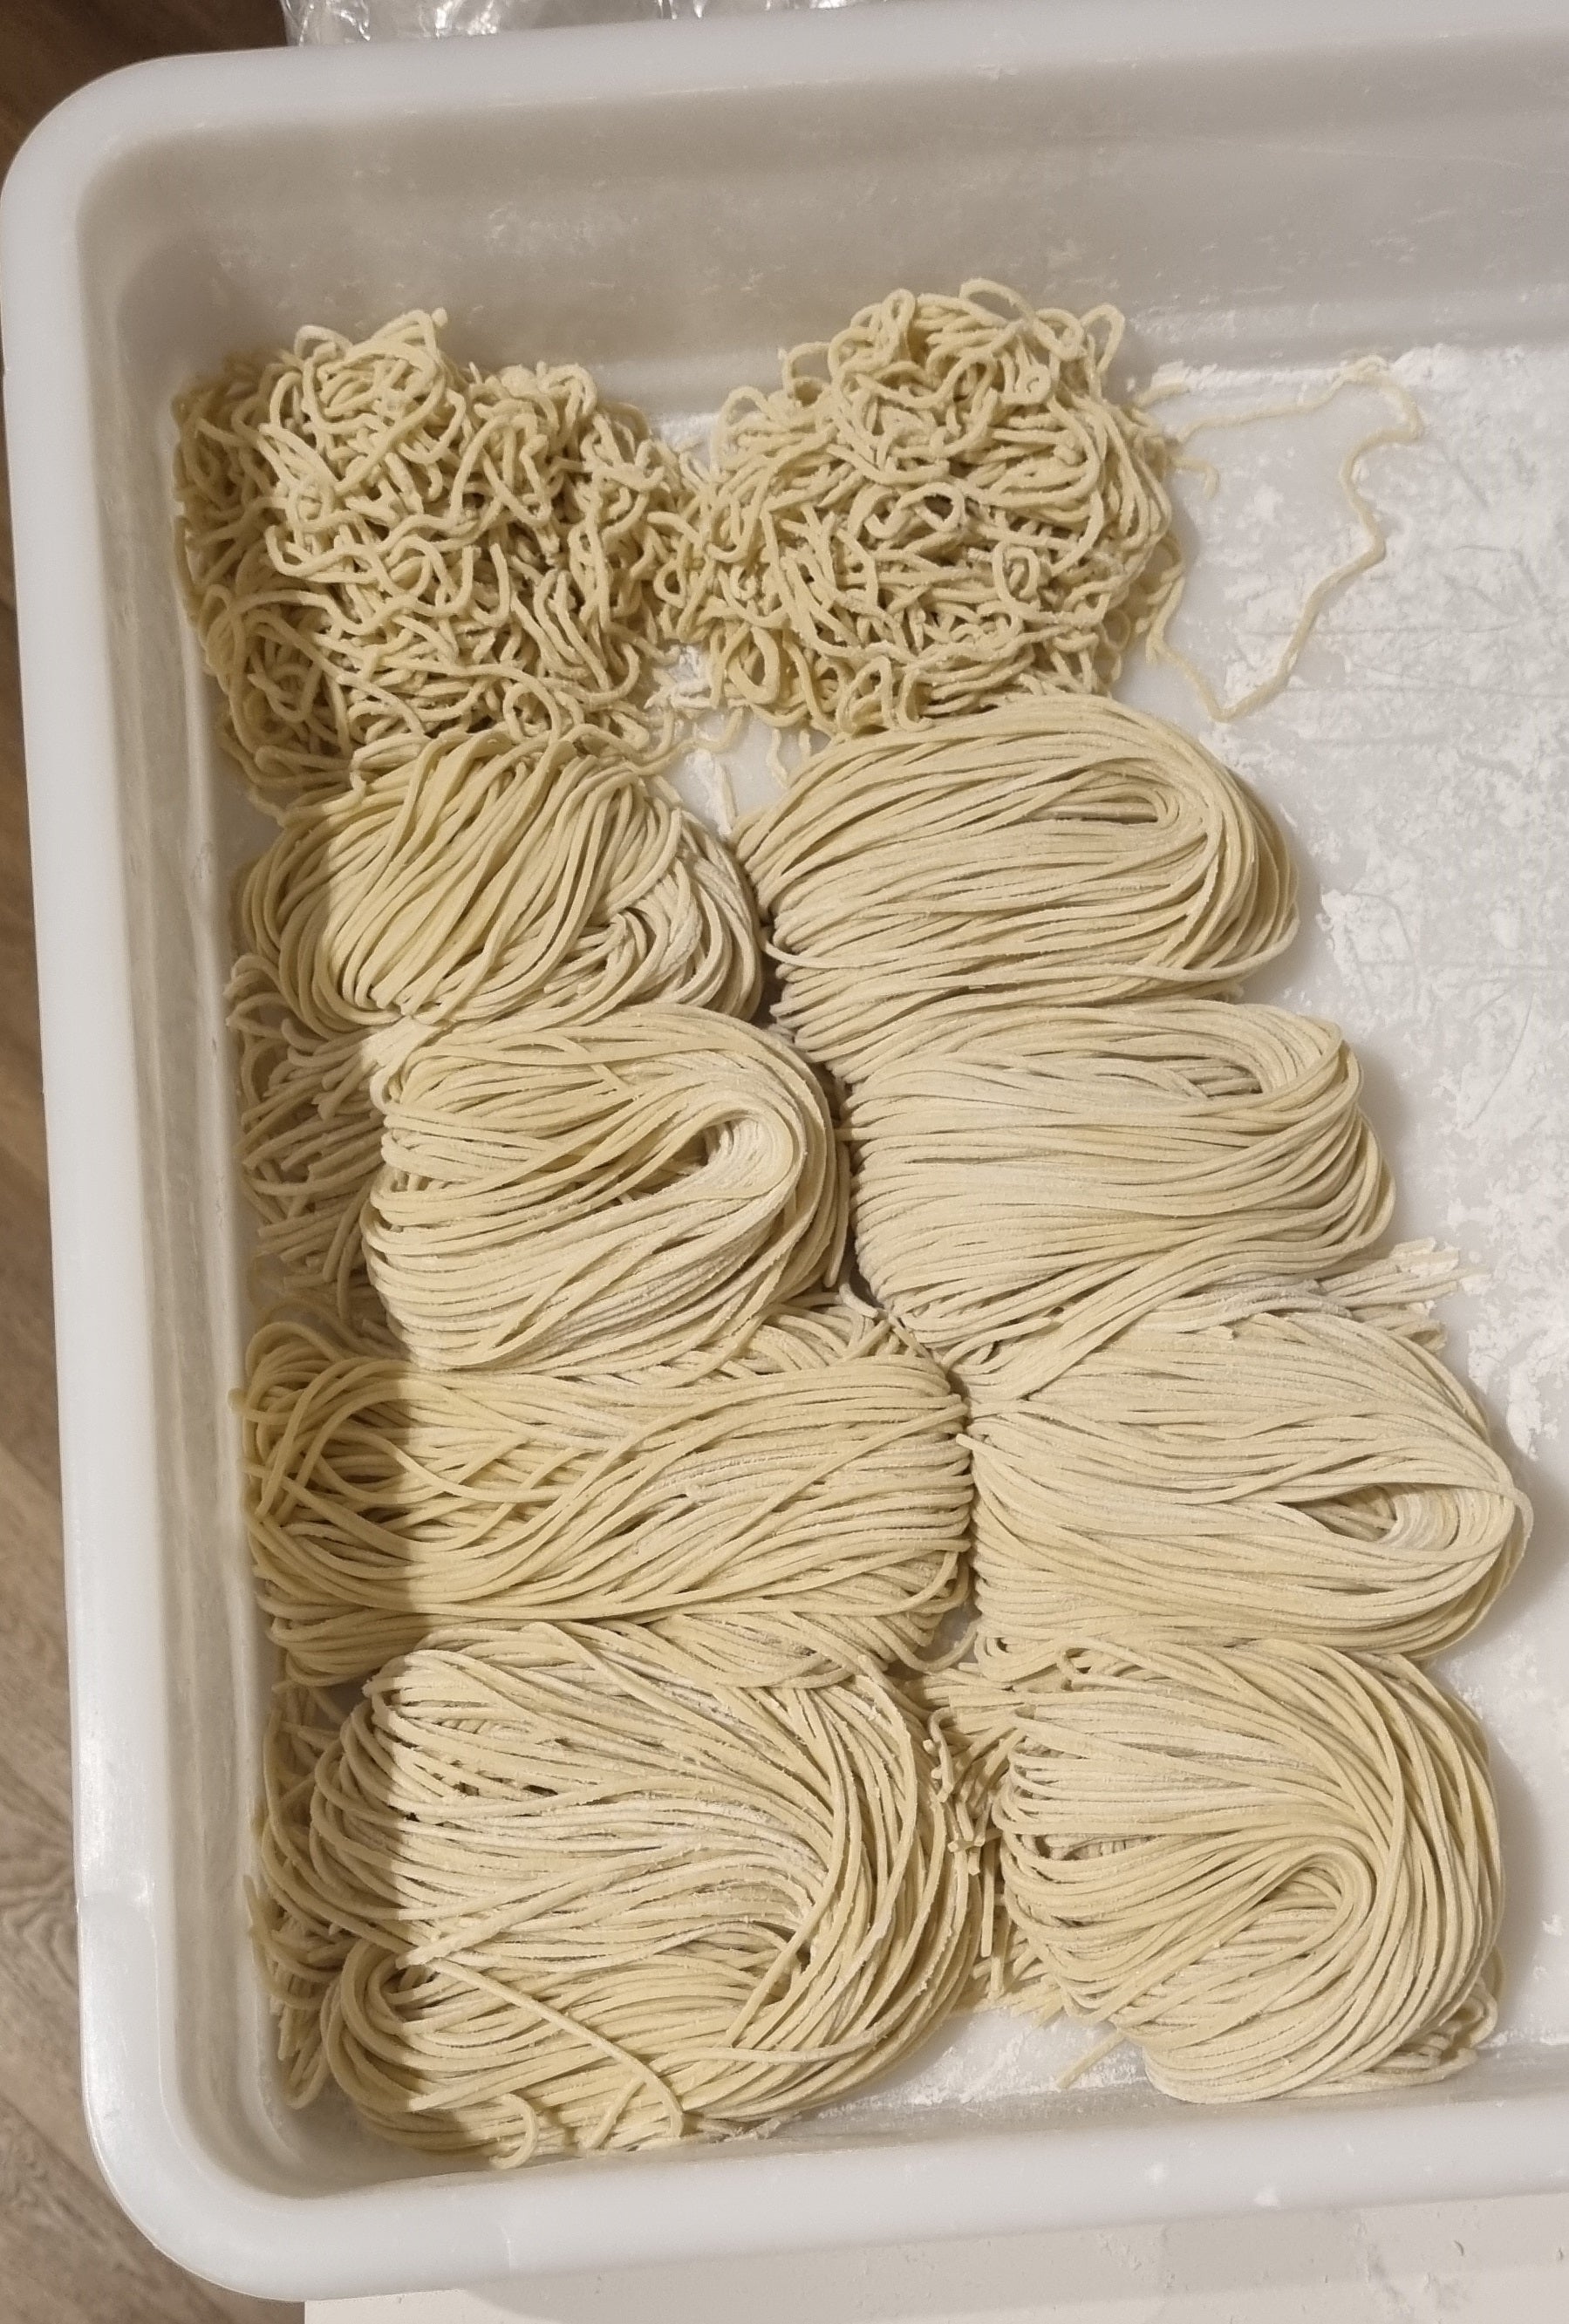 How to make Ramen Noodles at home using your KitchenAid. 